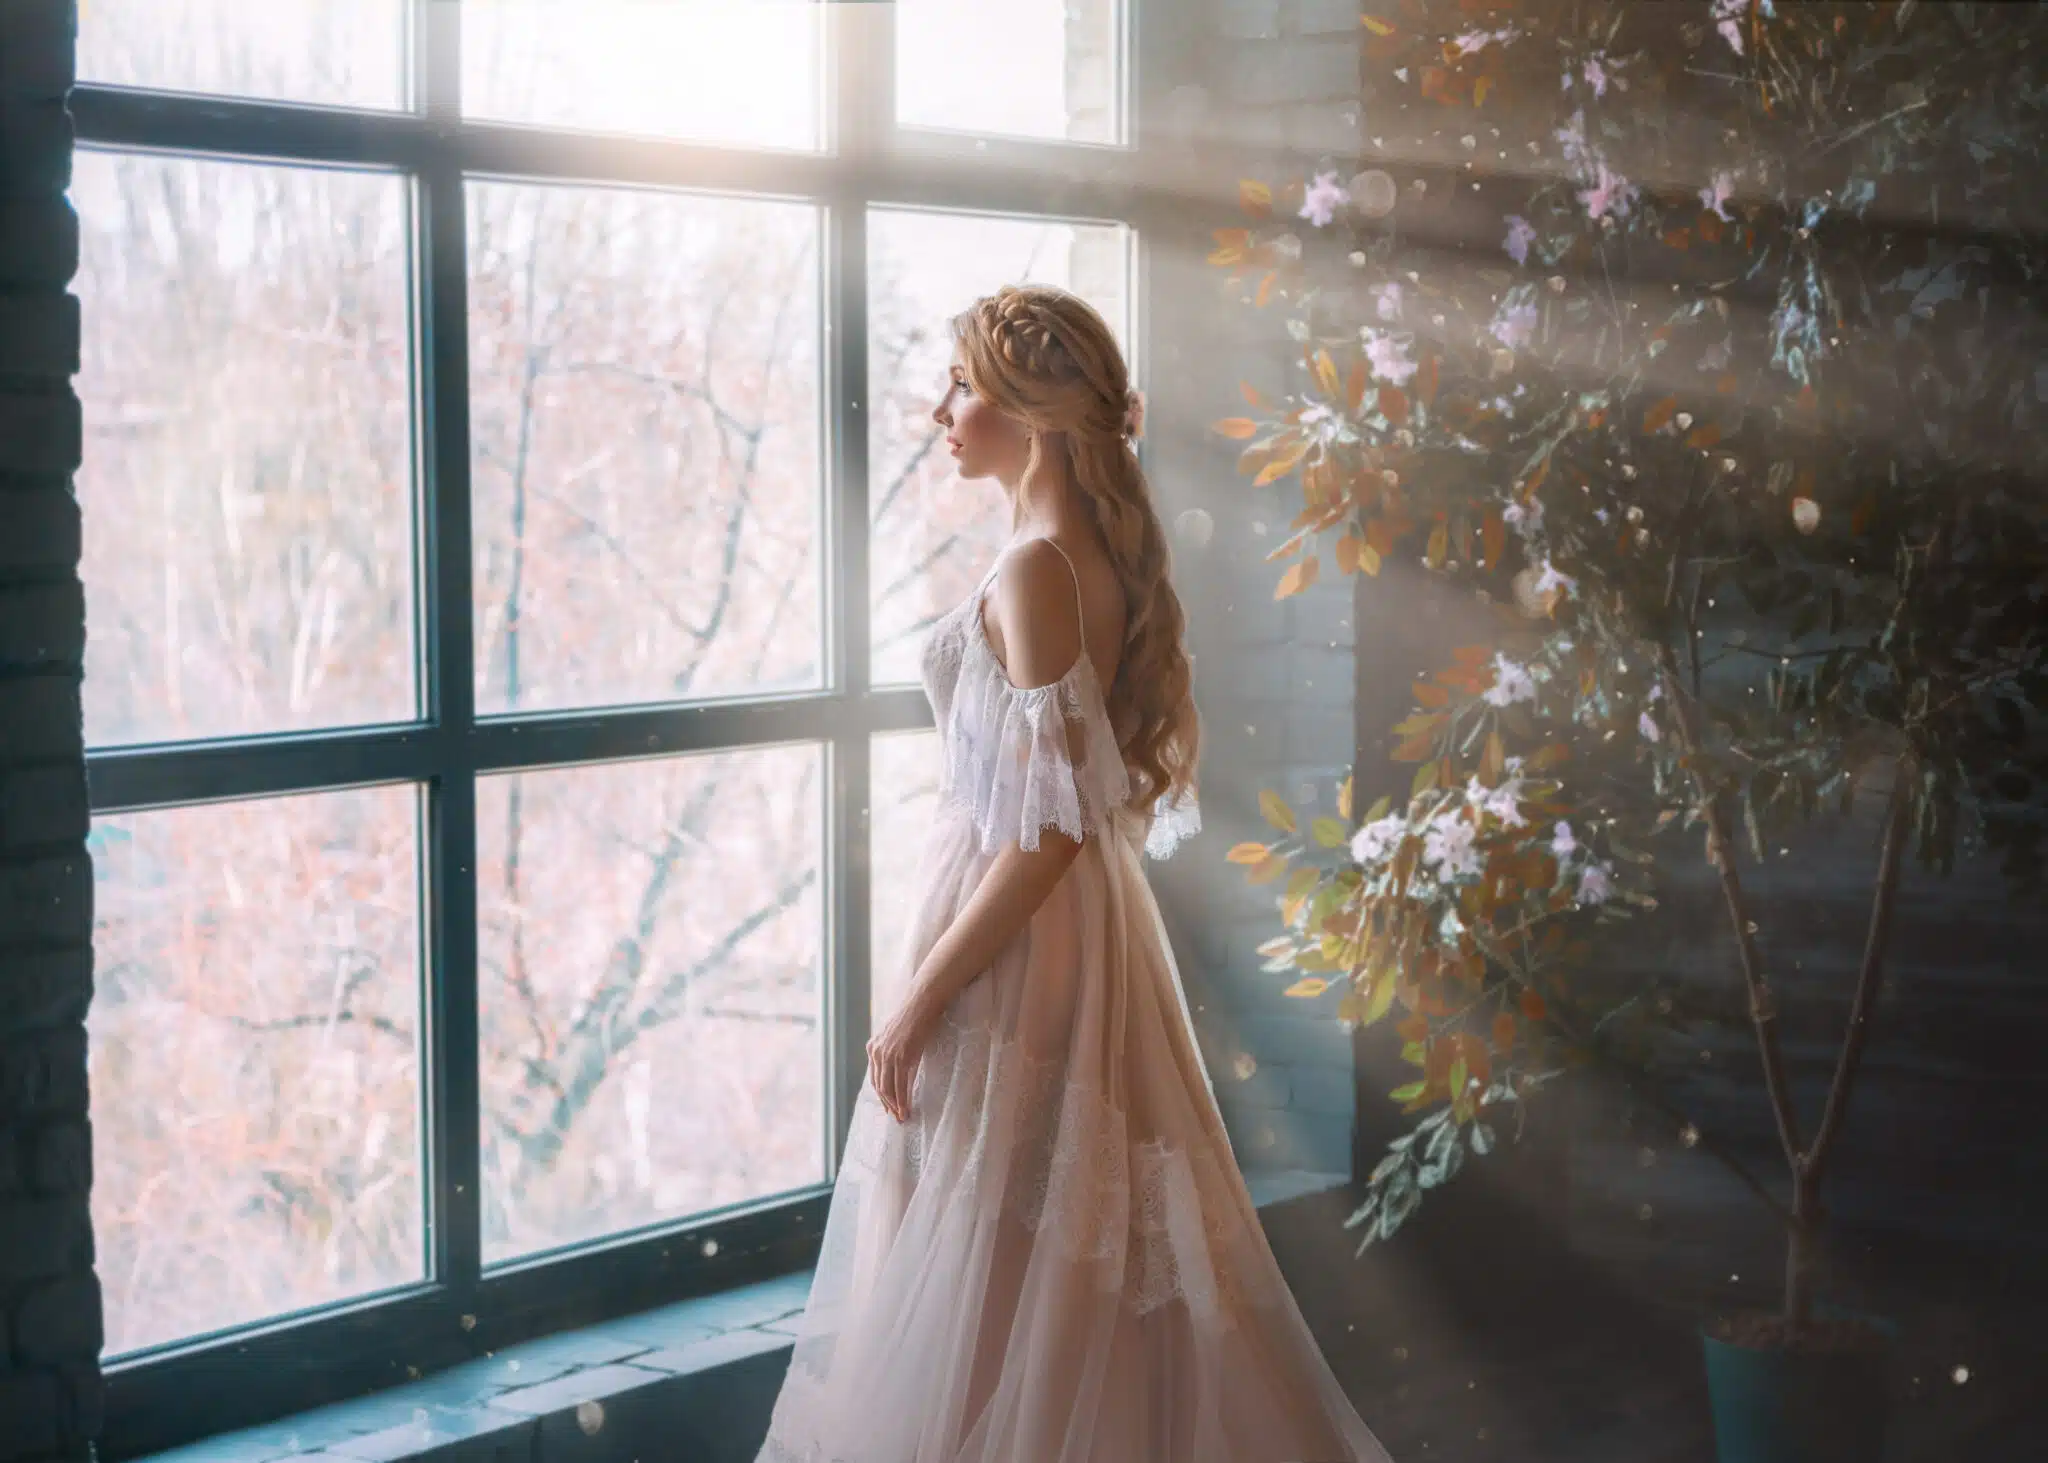 Romantic lady, blonde woman with long hair in white vintage dress stands in dark room, looks out window. 